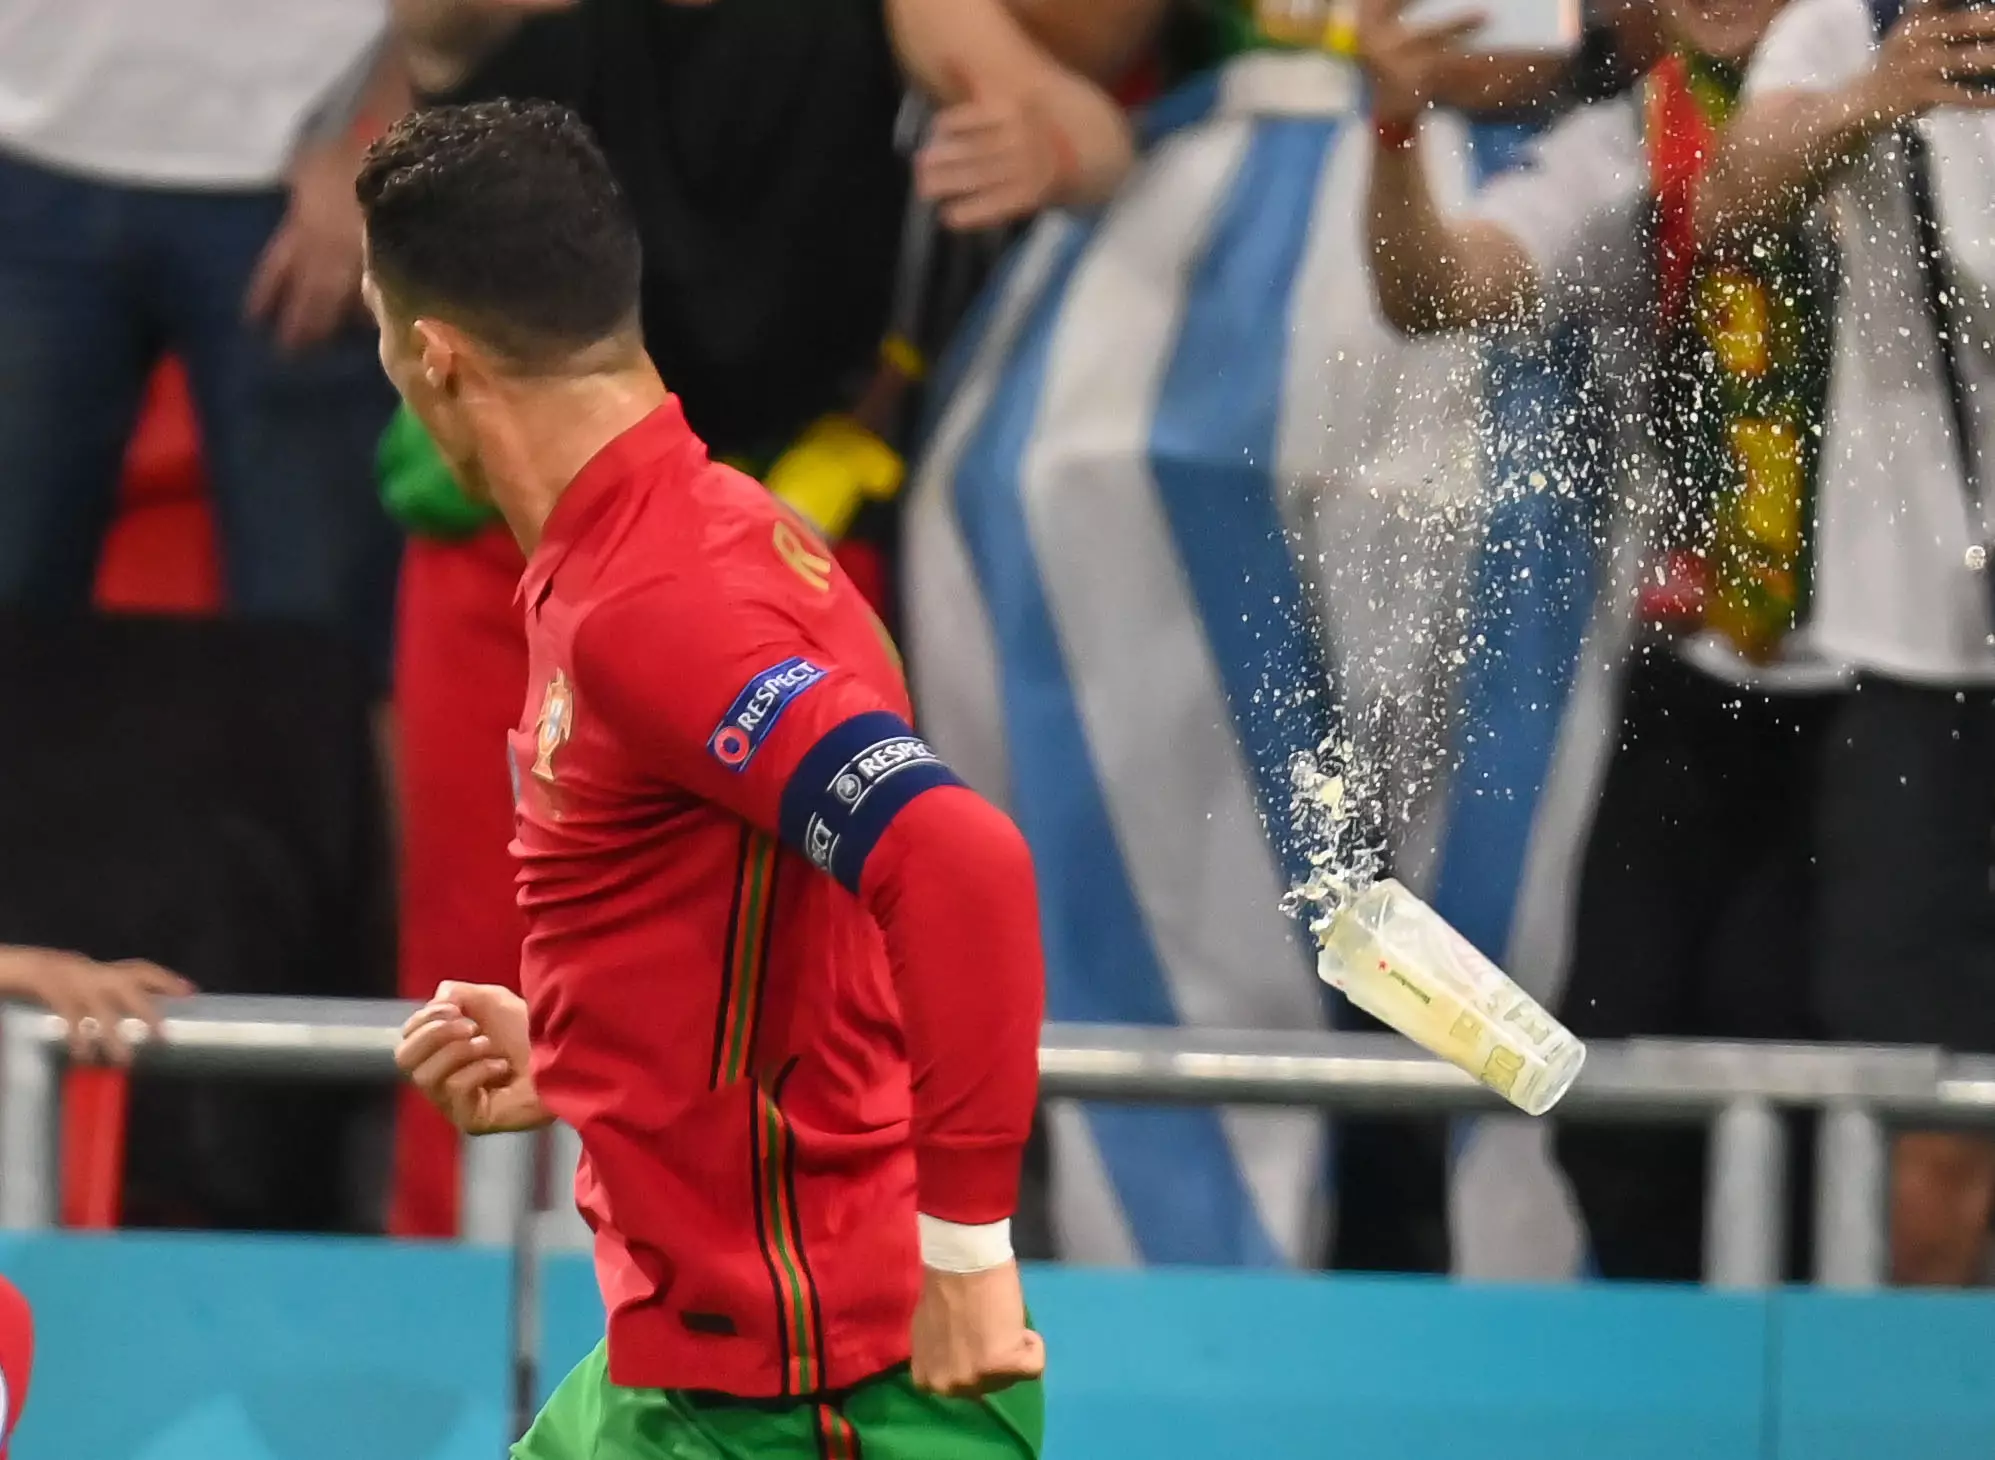 Fans also threw cups of beer at Ronaldo.